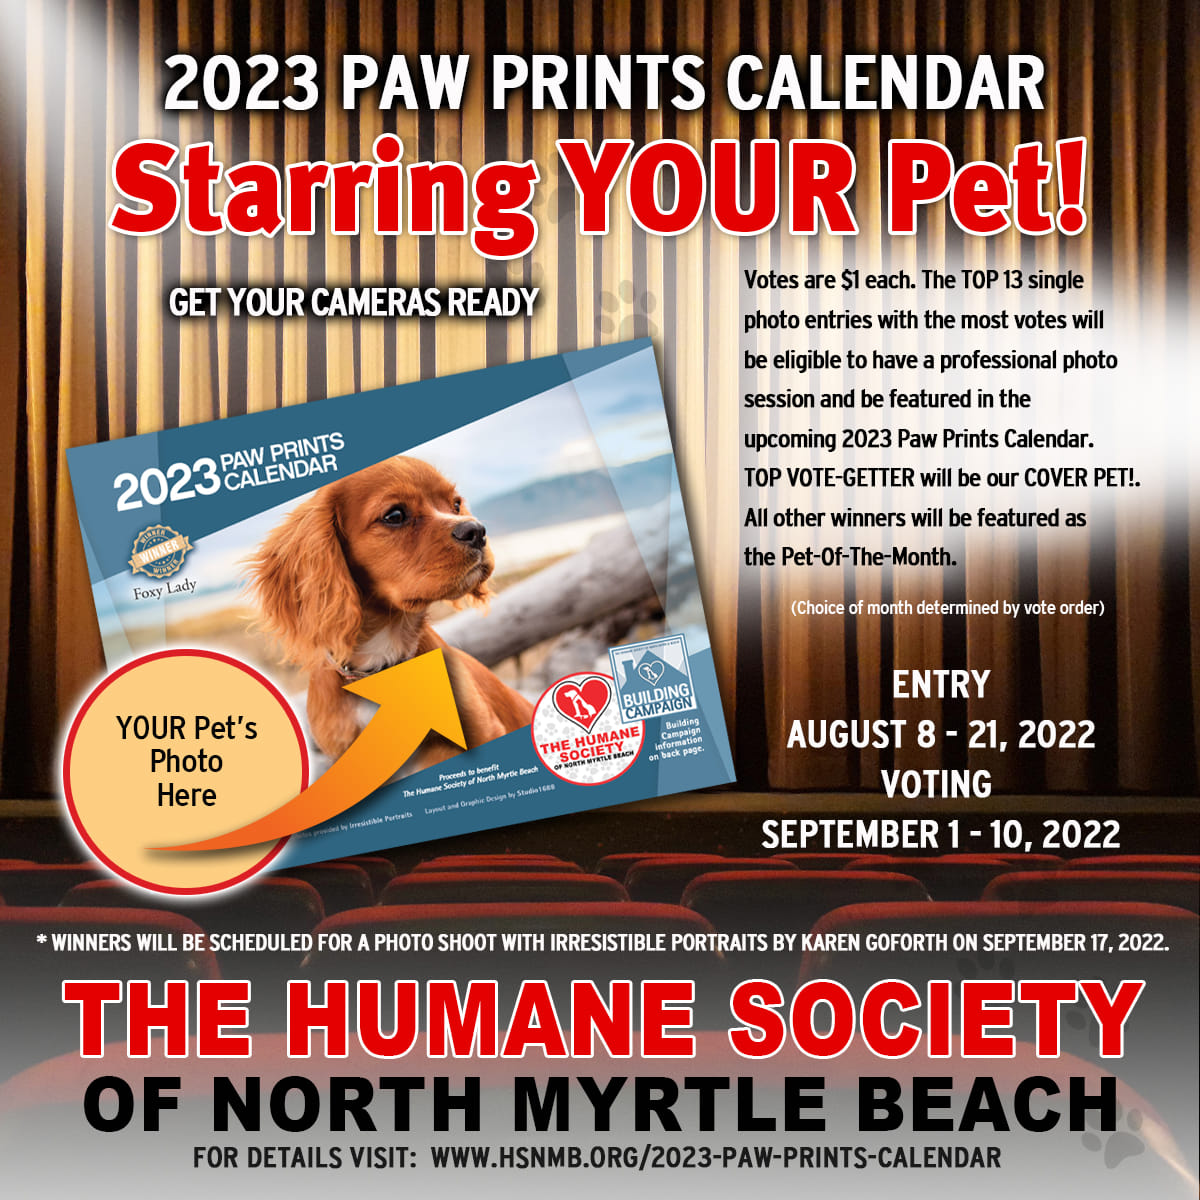 2023 Paw Prints Calendar Contest Voting The Humane Society of North